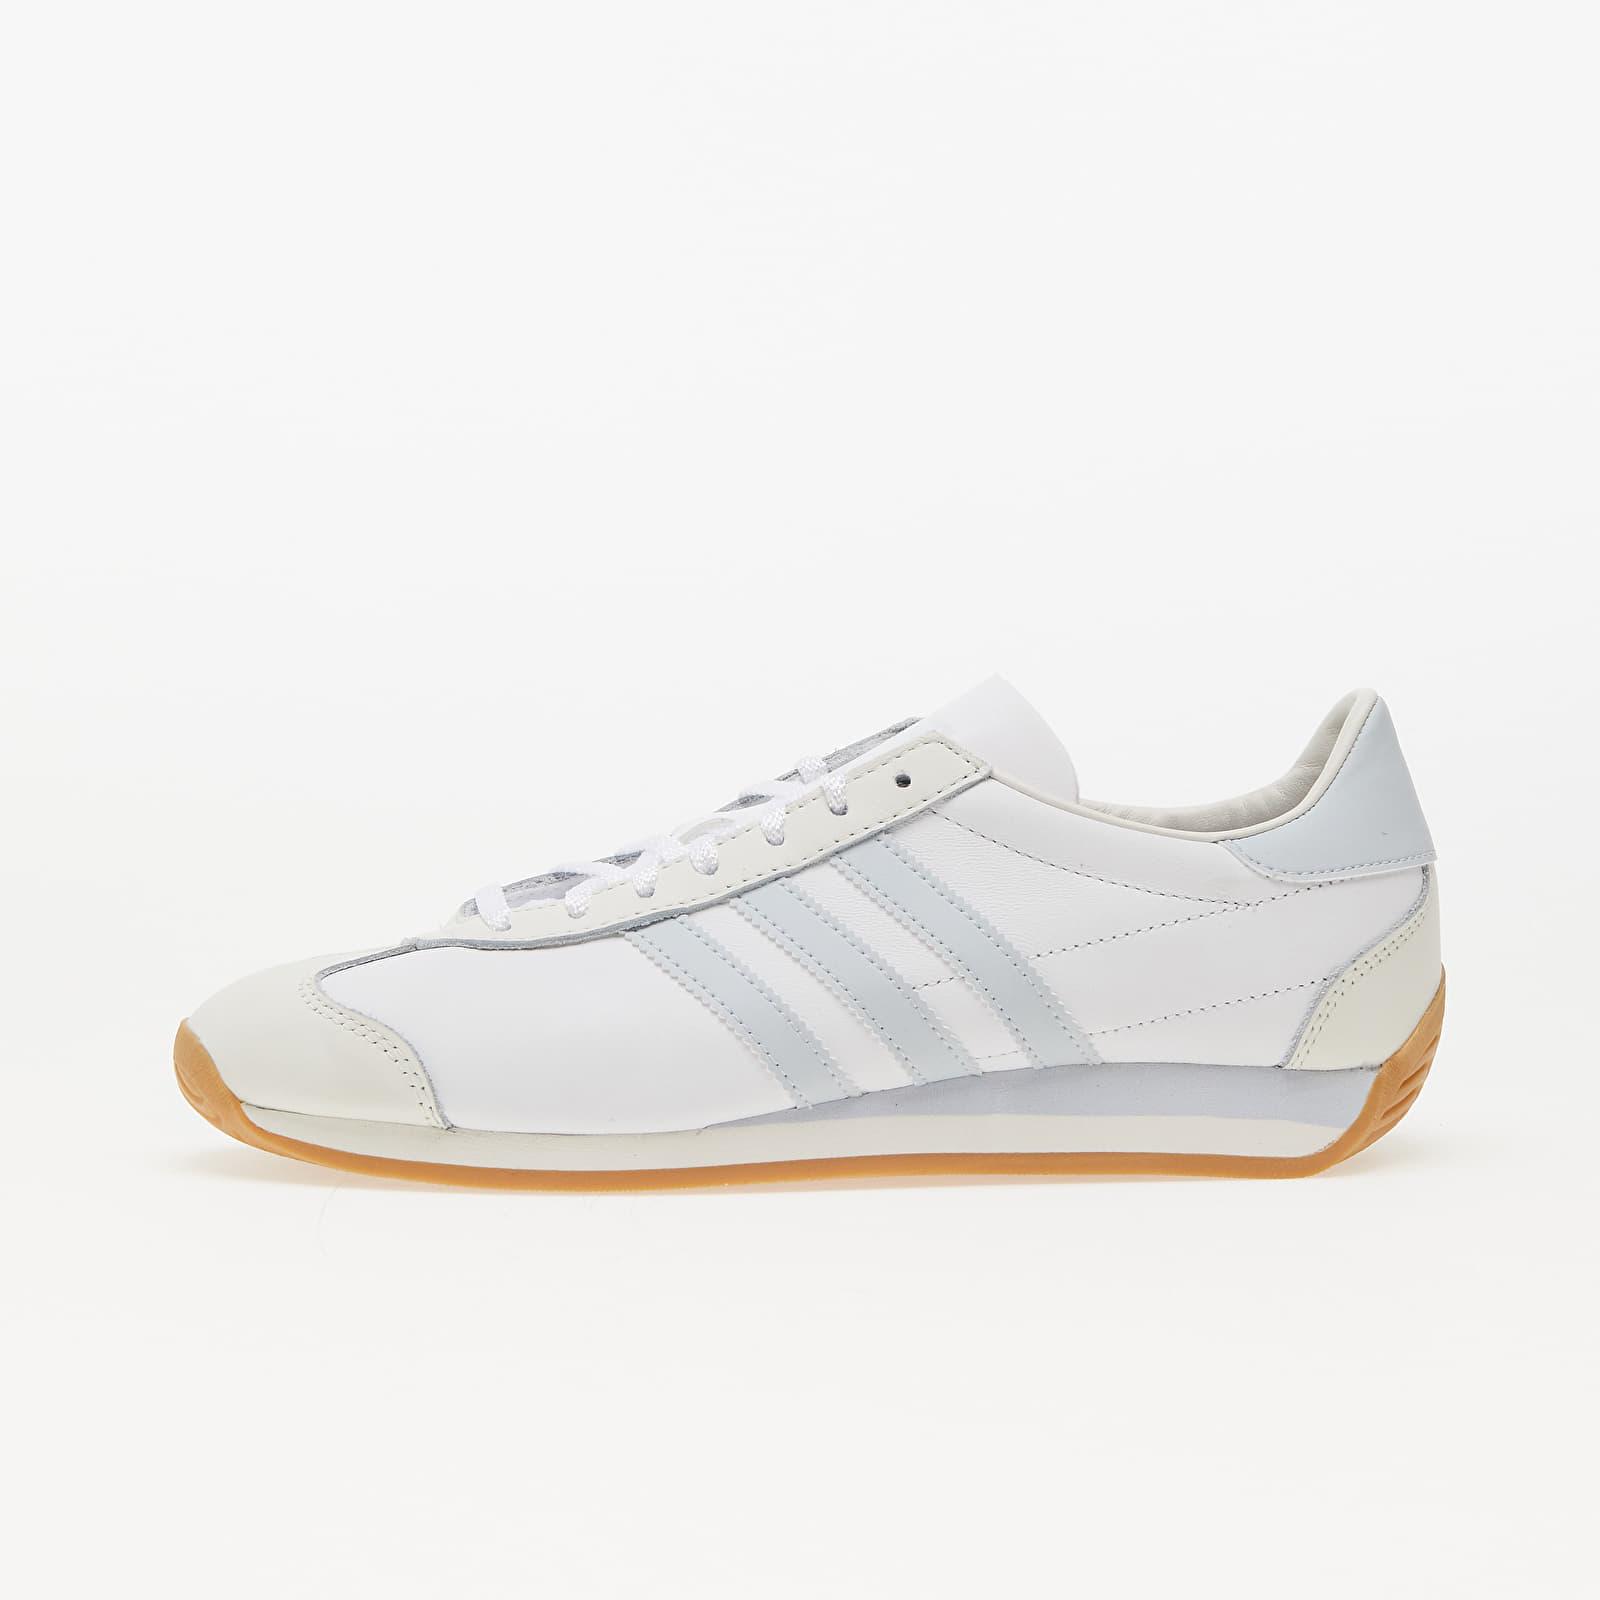 adidas Originals Og Adidas Halo Cloud Blue/ | / in W Ftw White Lyst Country